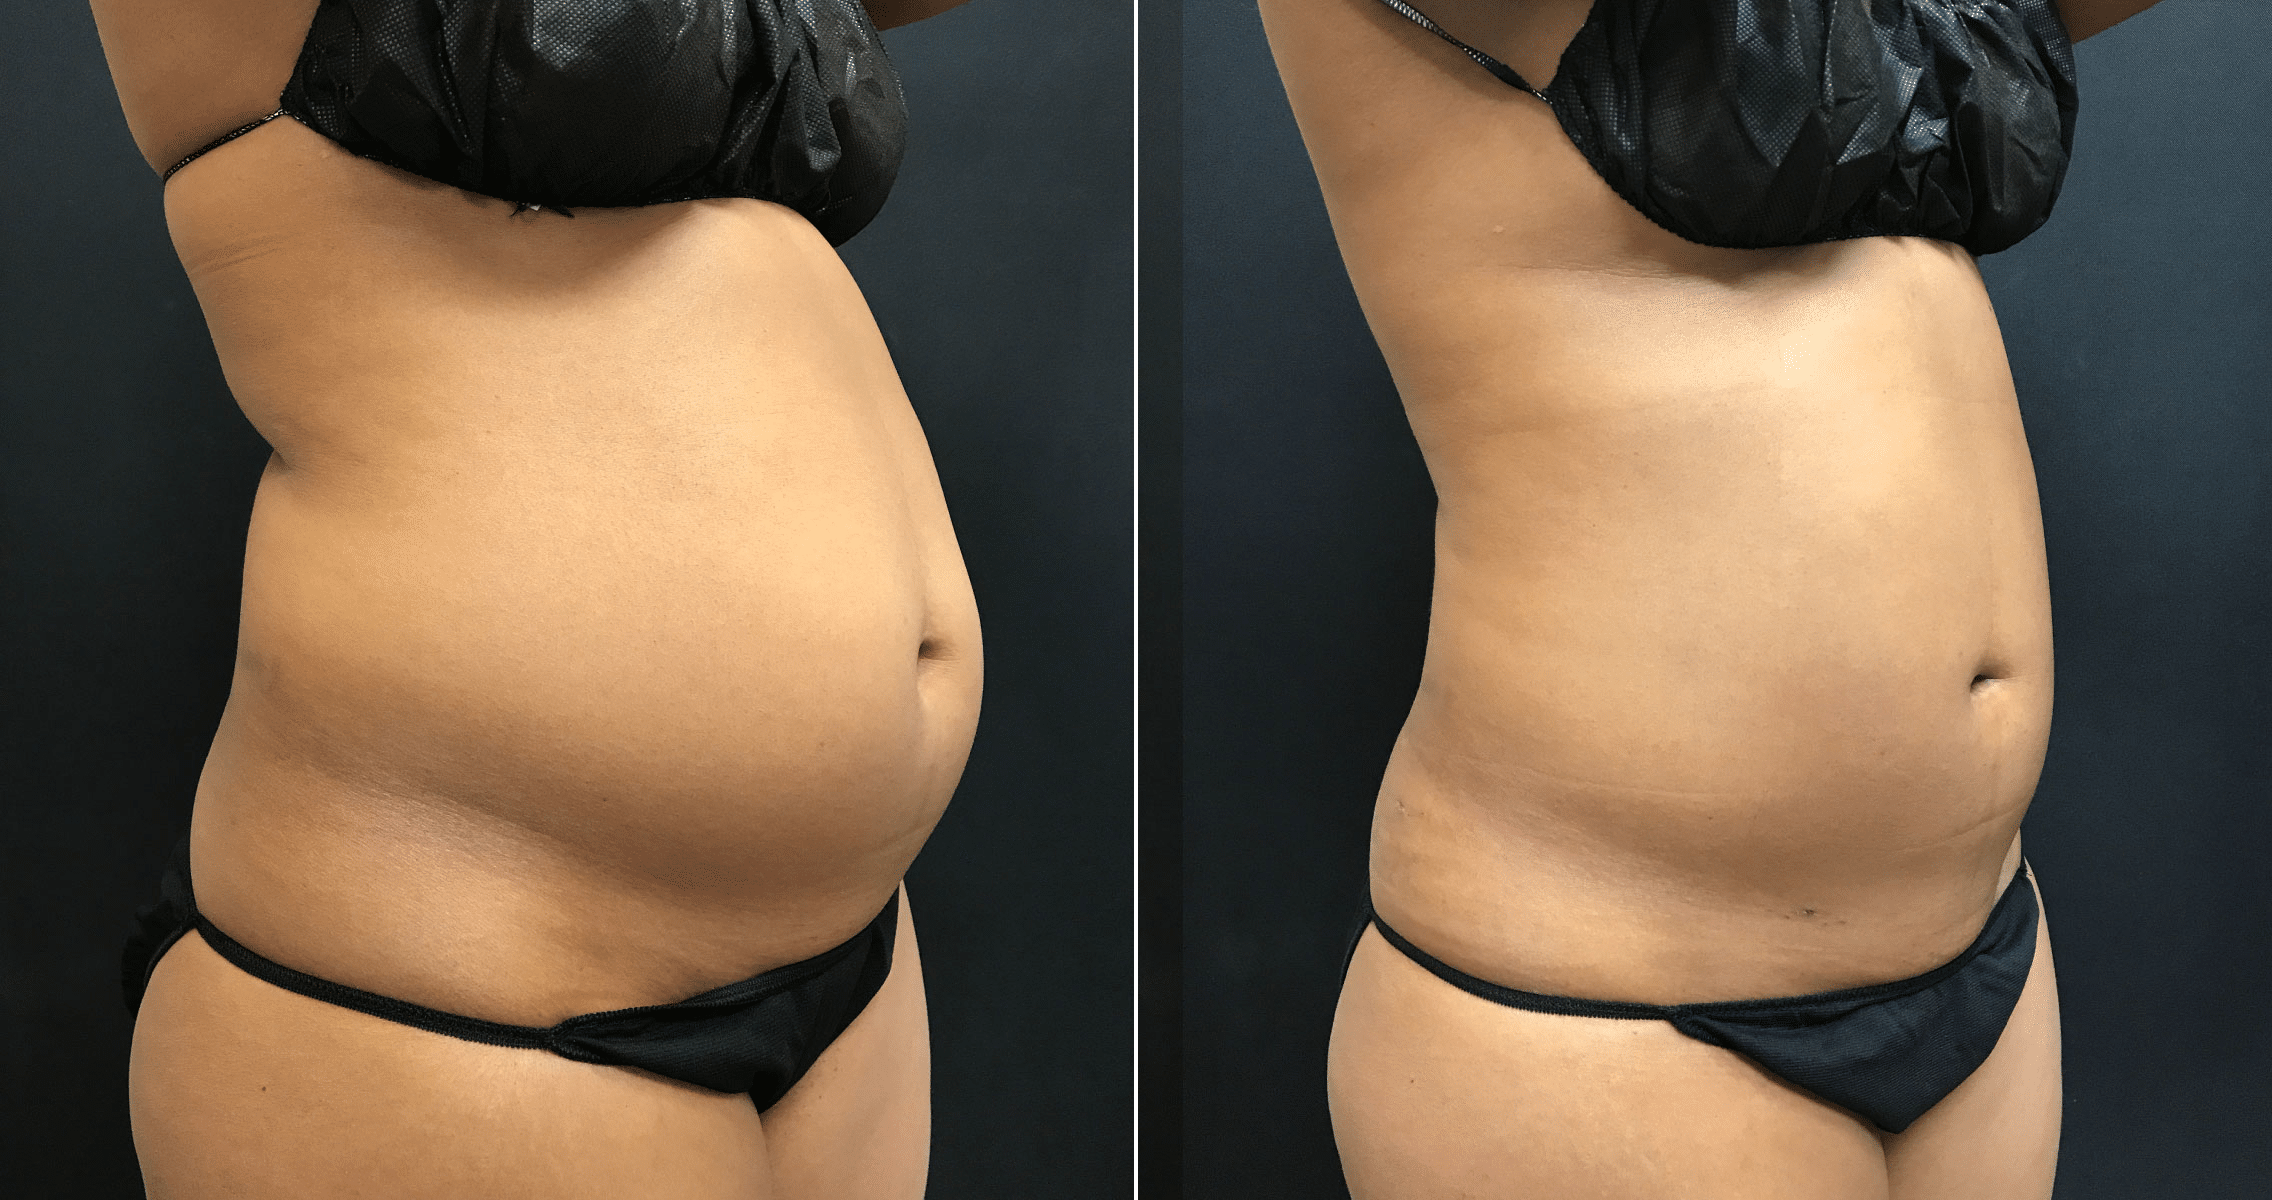 Vaser Lipo for Abdomen and Love Handles for Woman in Her 40's